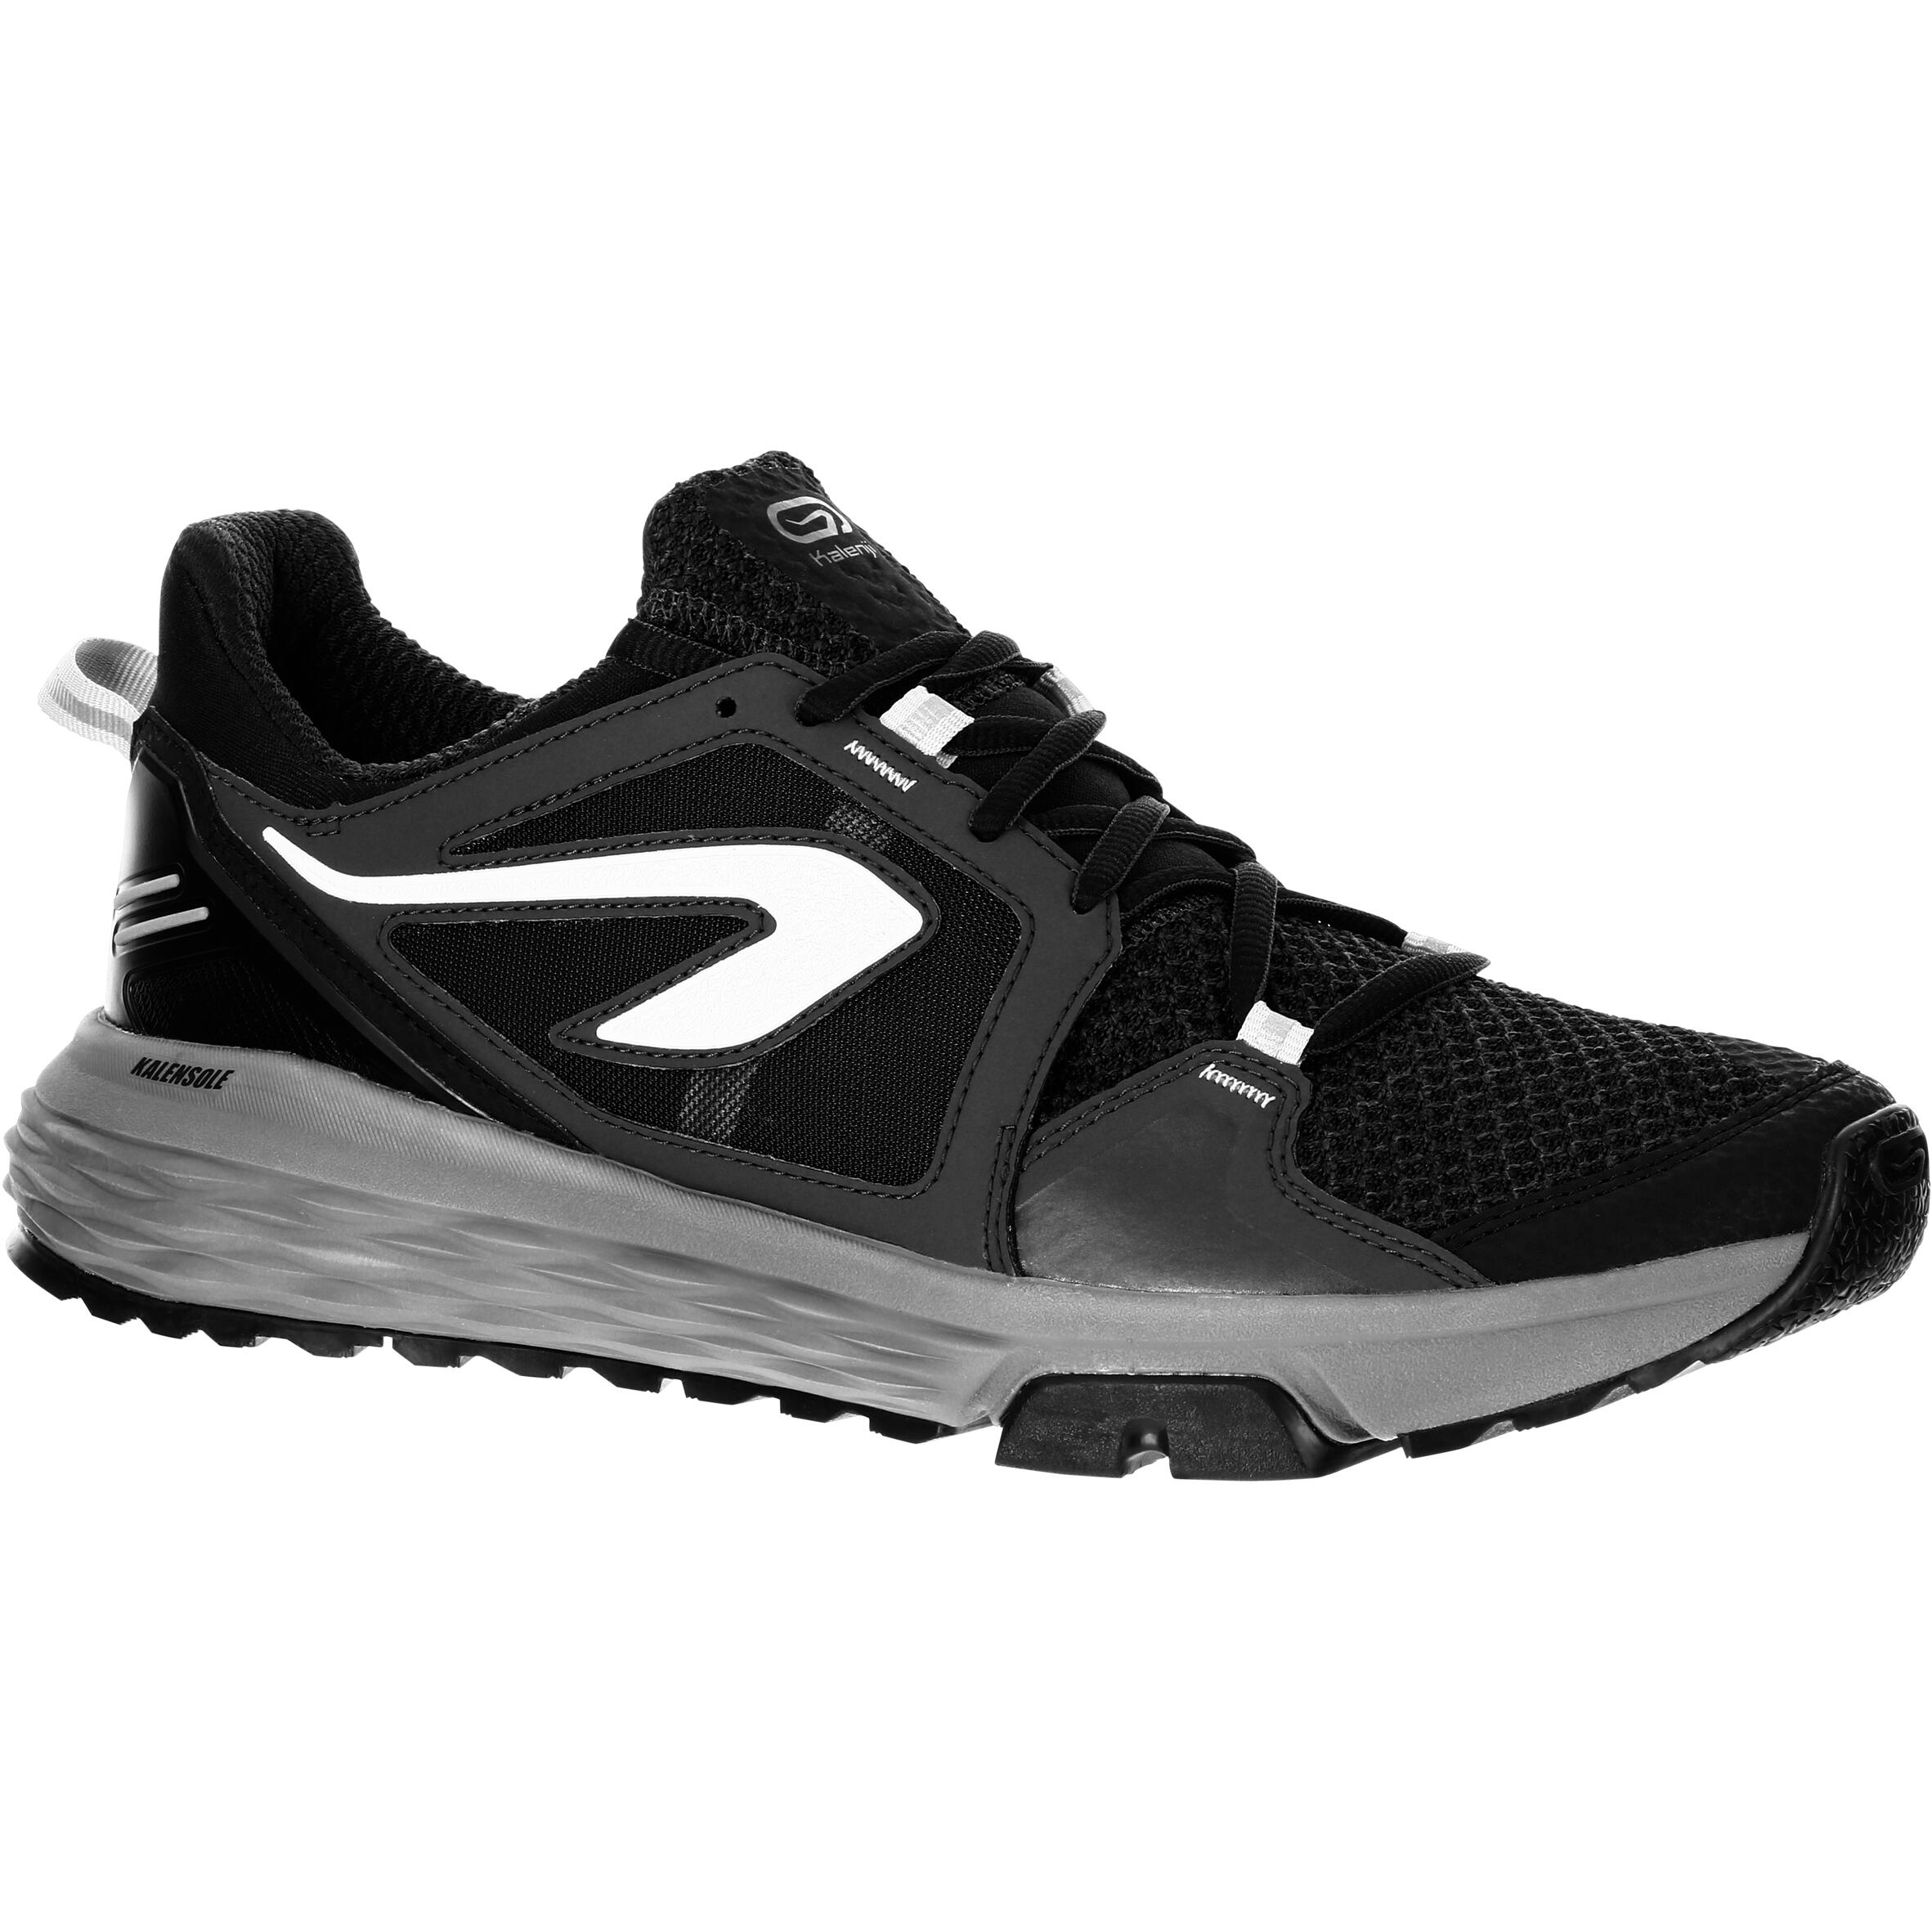 comfortable black running shoes